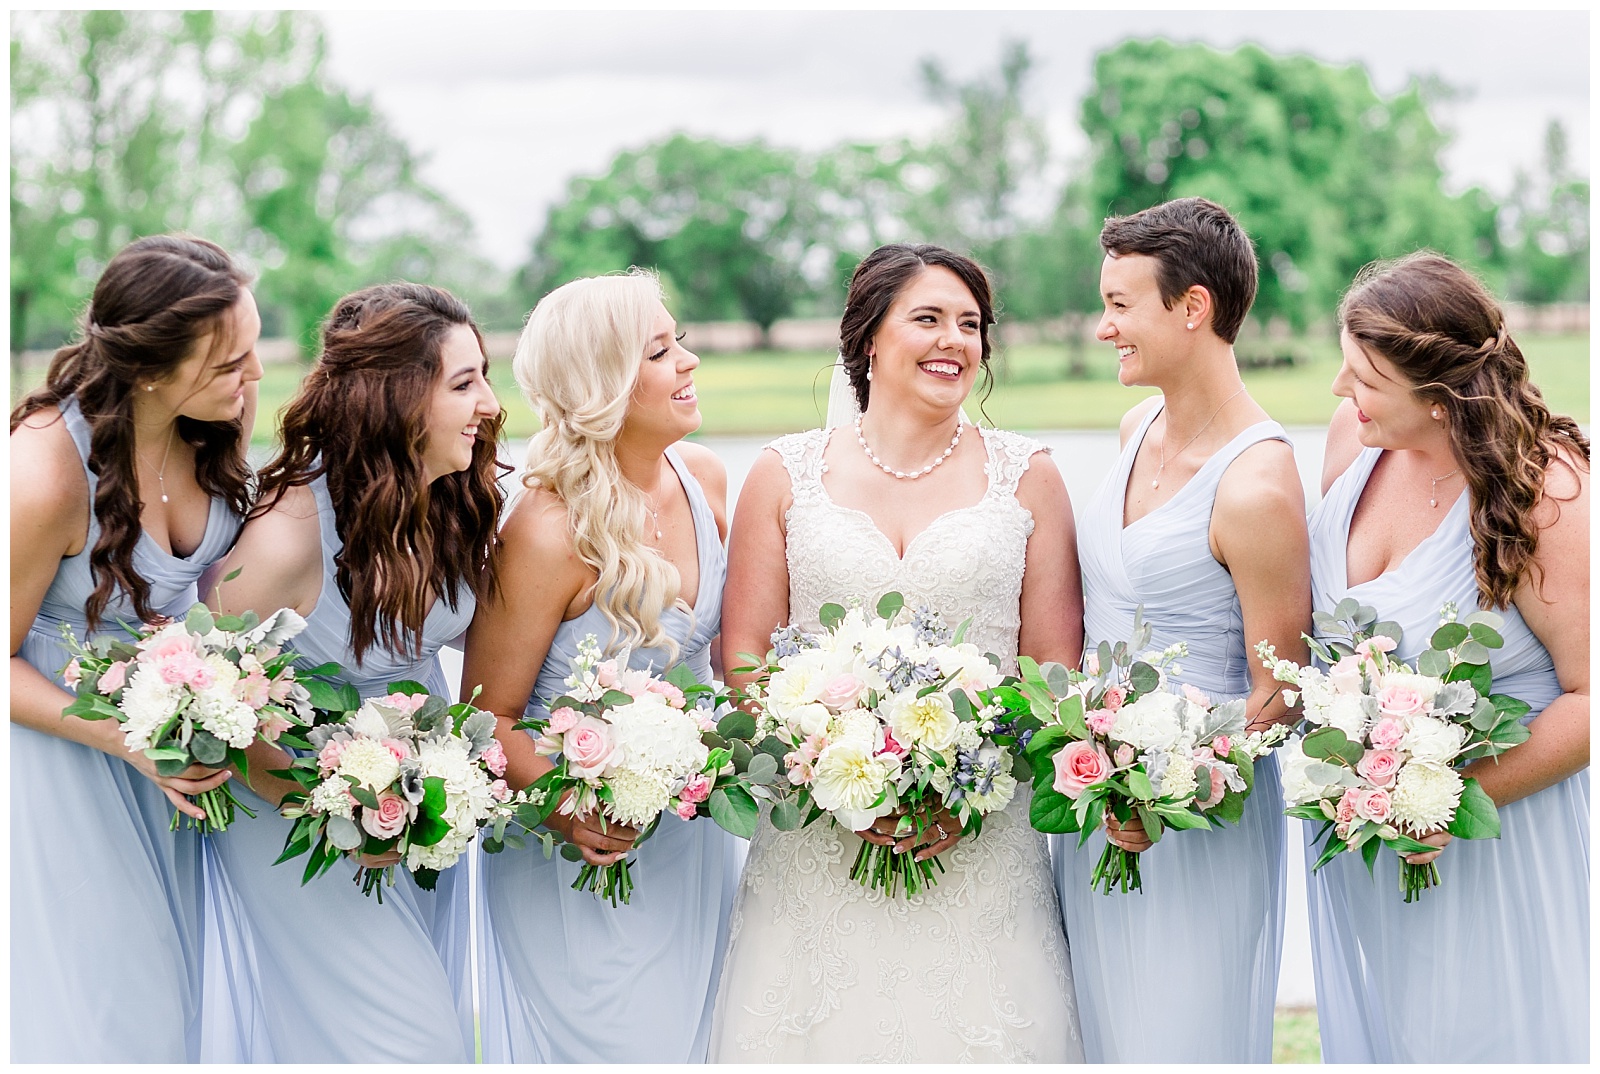 light blue bridesmaids dresses with white yellow pink and blue florals and details at rustic farm venue in alabama